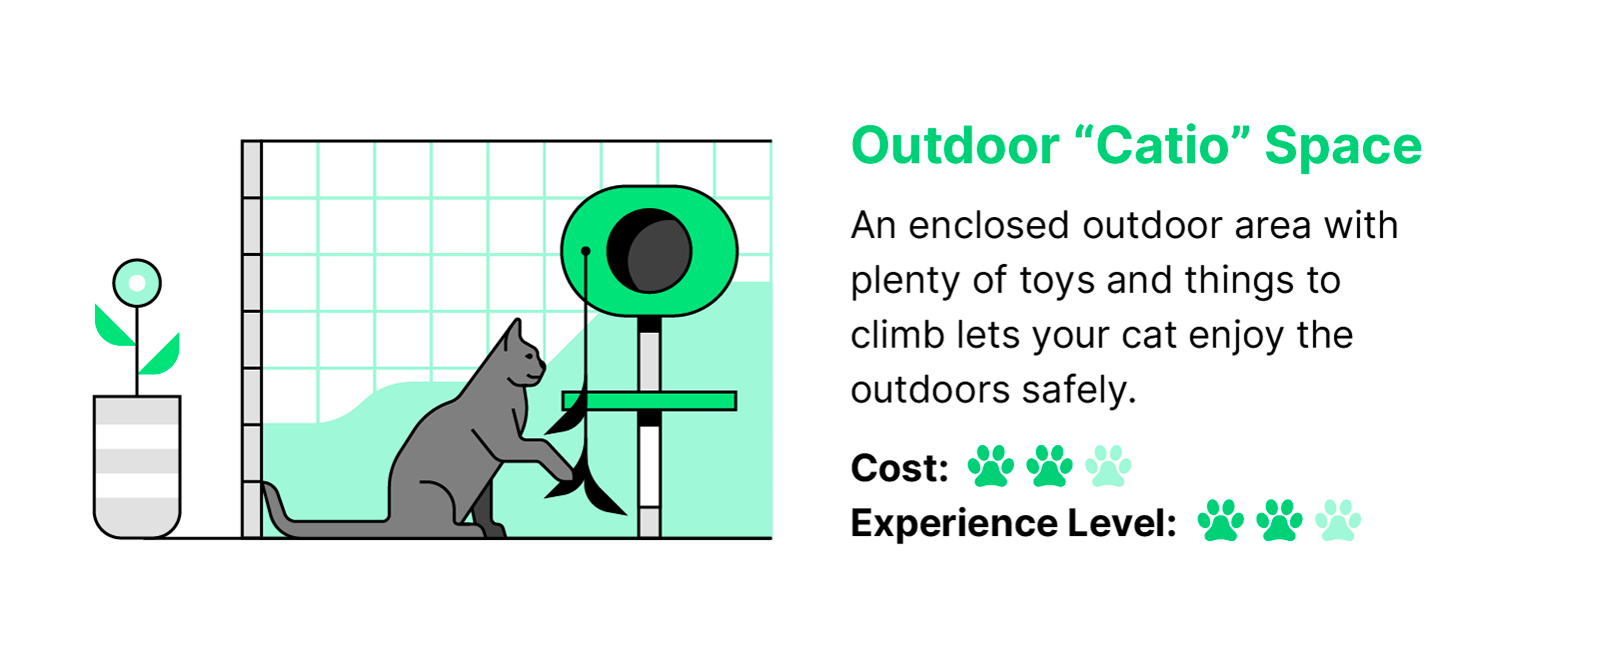 Green black and white illustration of a cat in an outdoor enclosure playing with a toy with text